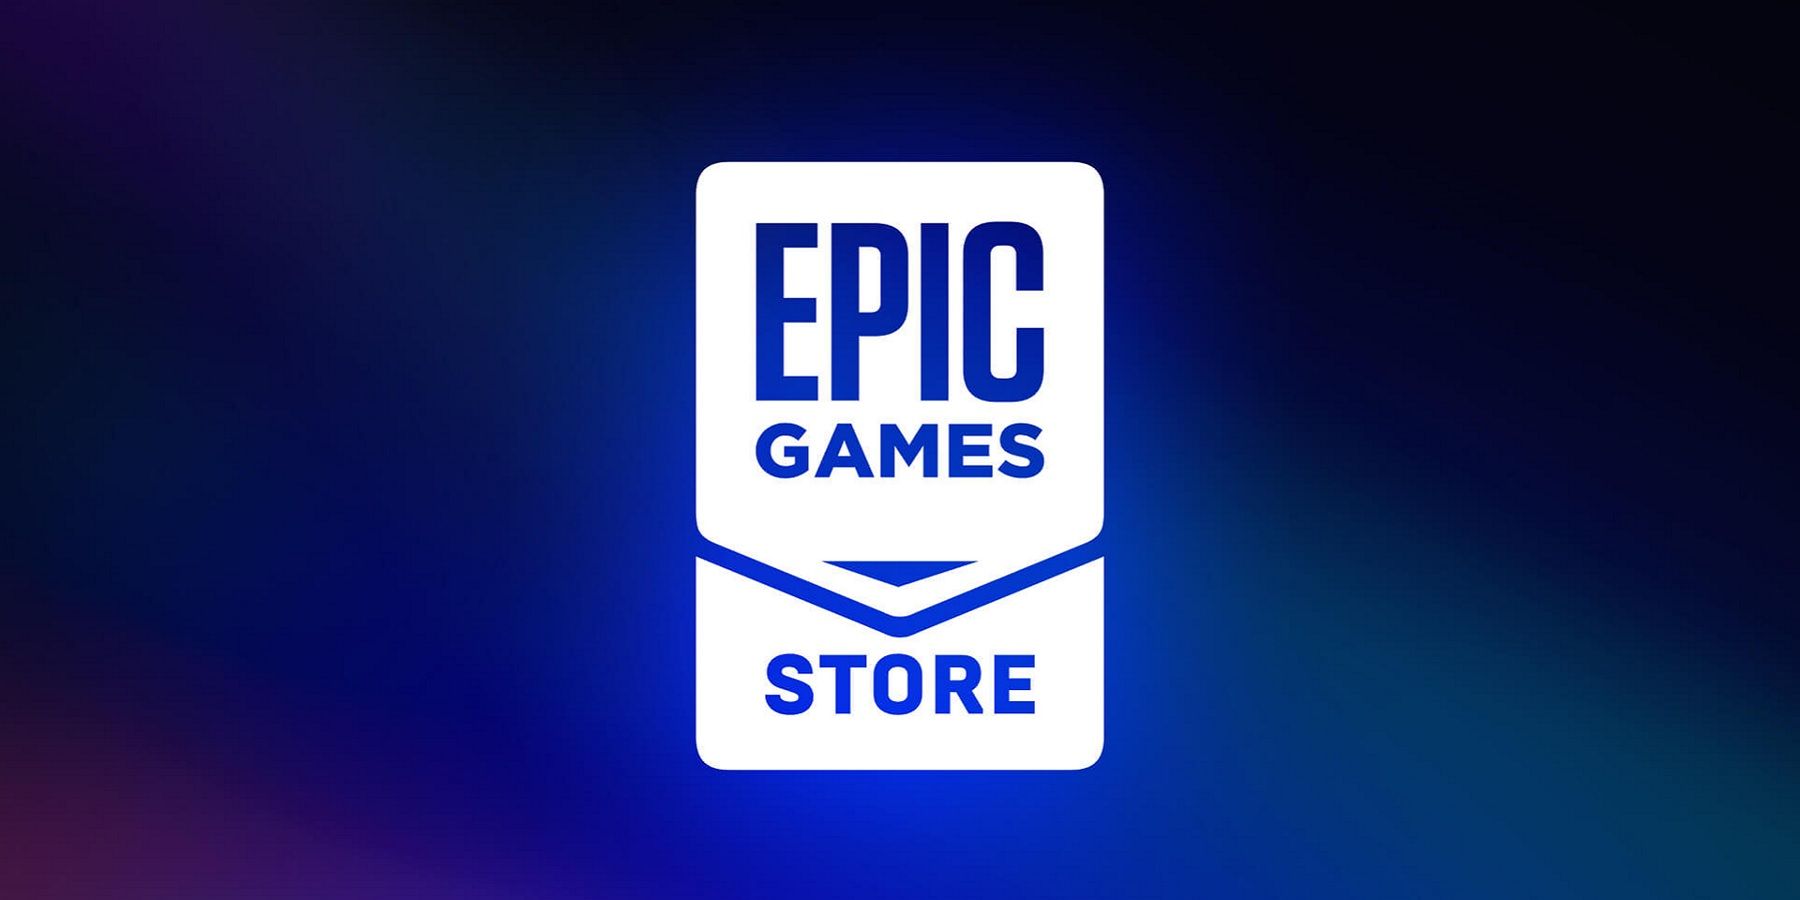 27.10.22 GAMES FOR FREE ONLY TODAY! - JUST LOGIN in  EPIC GAMES